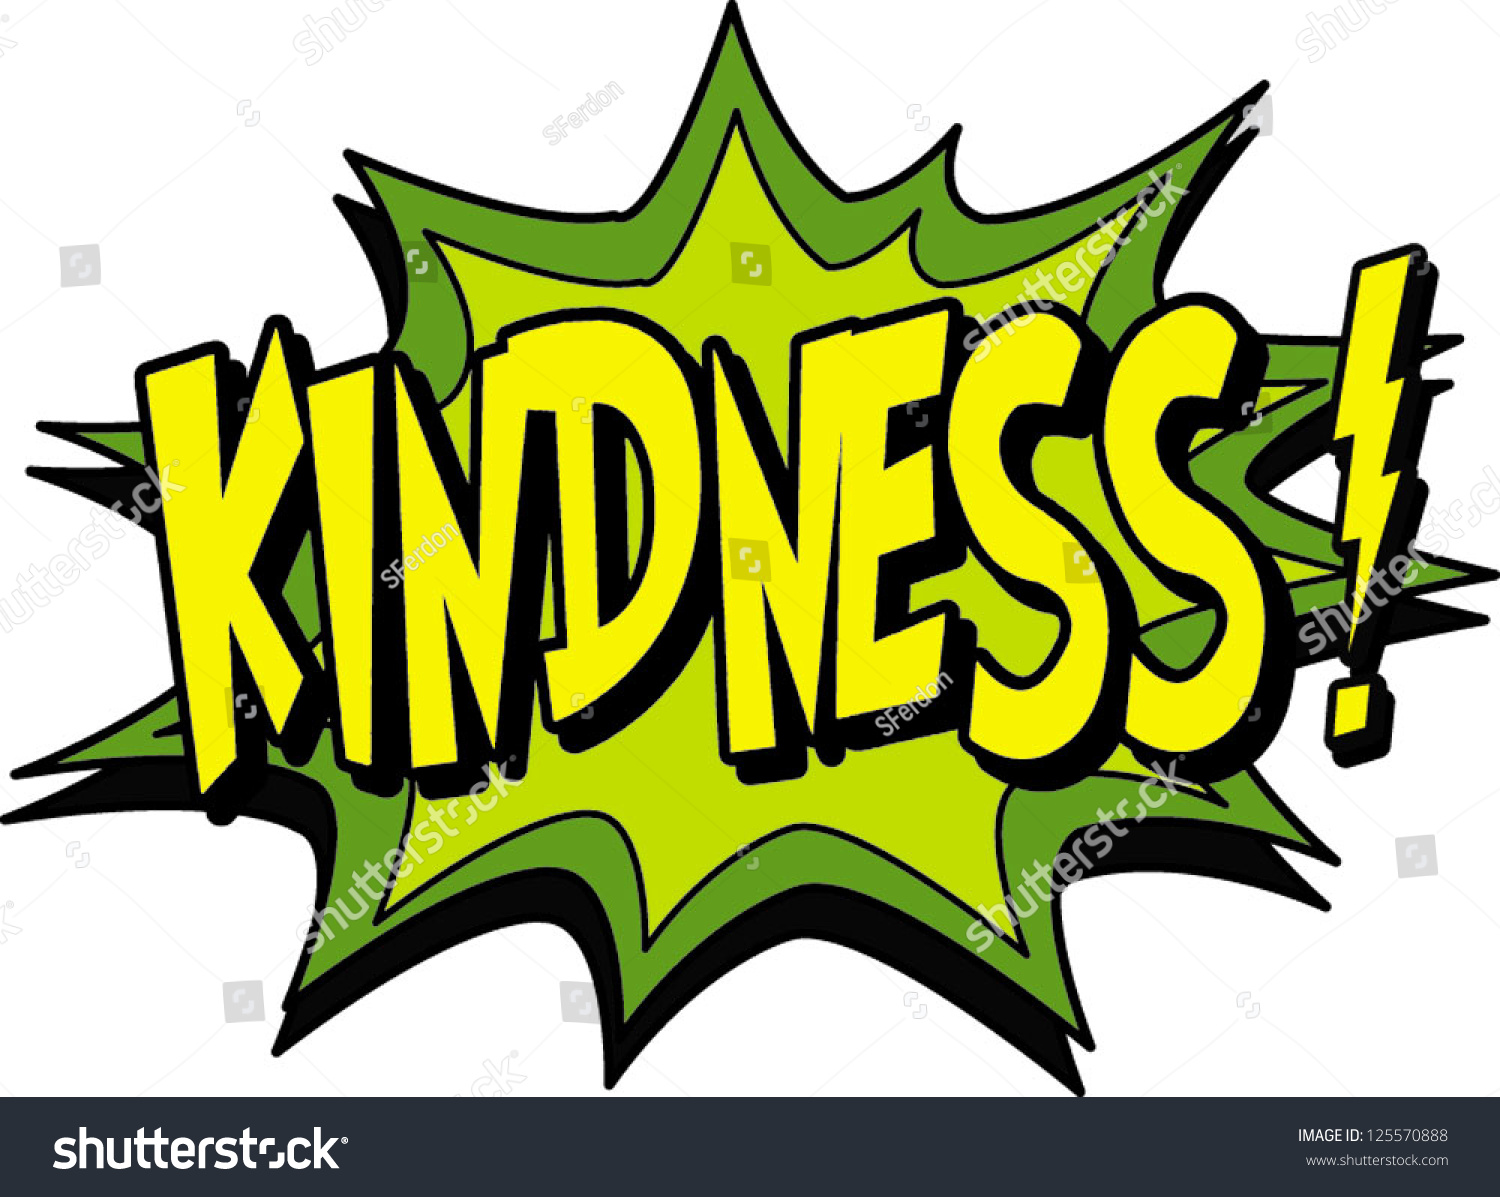 clipart of kindness - photo #18